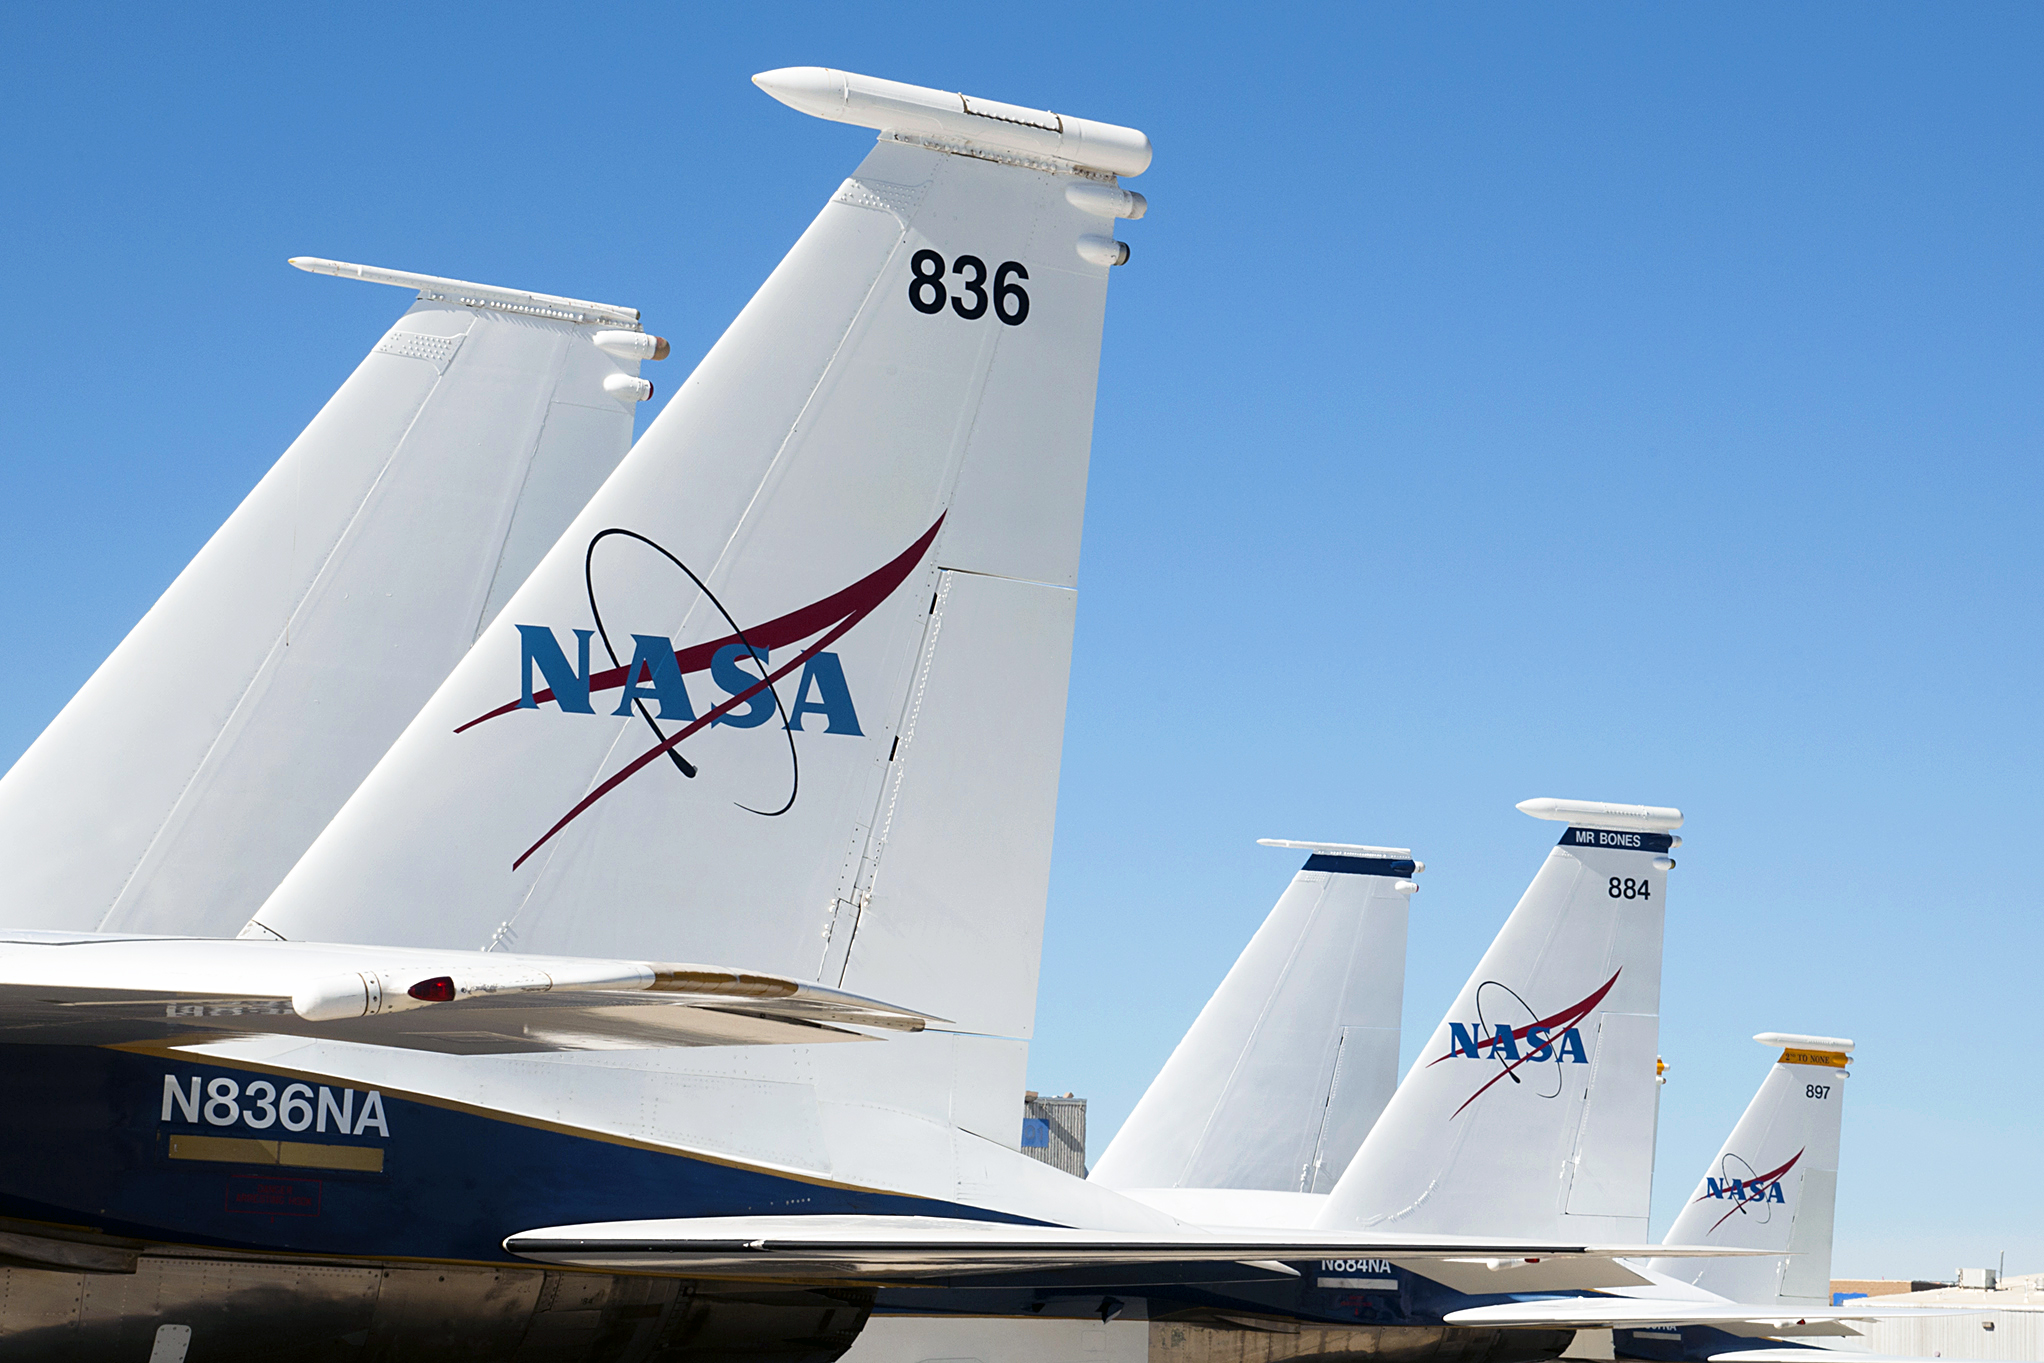 Against a clear sky, the vertical tail fins of three F-15 jets used by NASA are seen, some displaying a NASA logo.